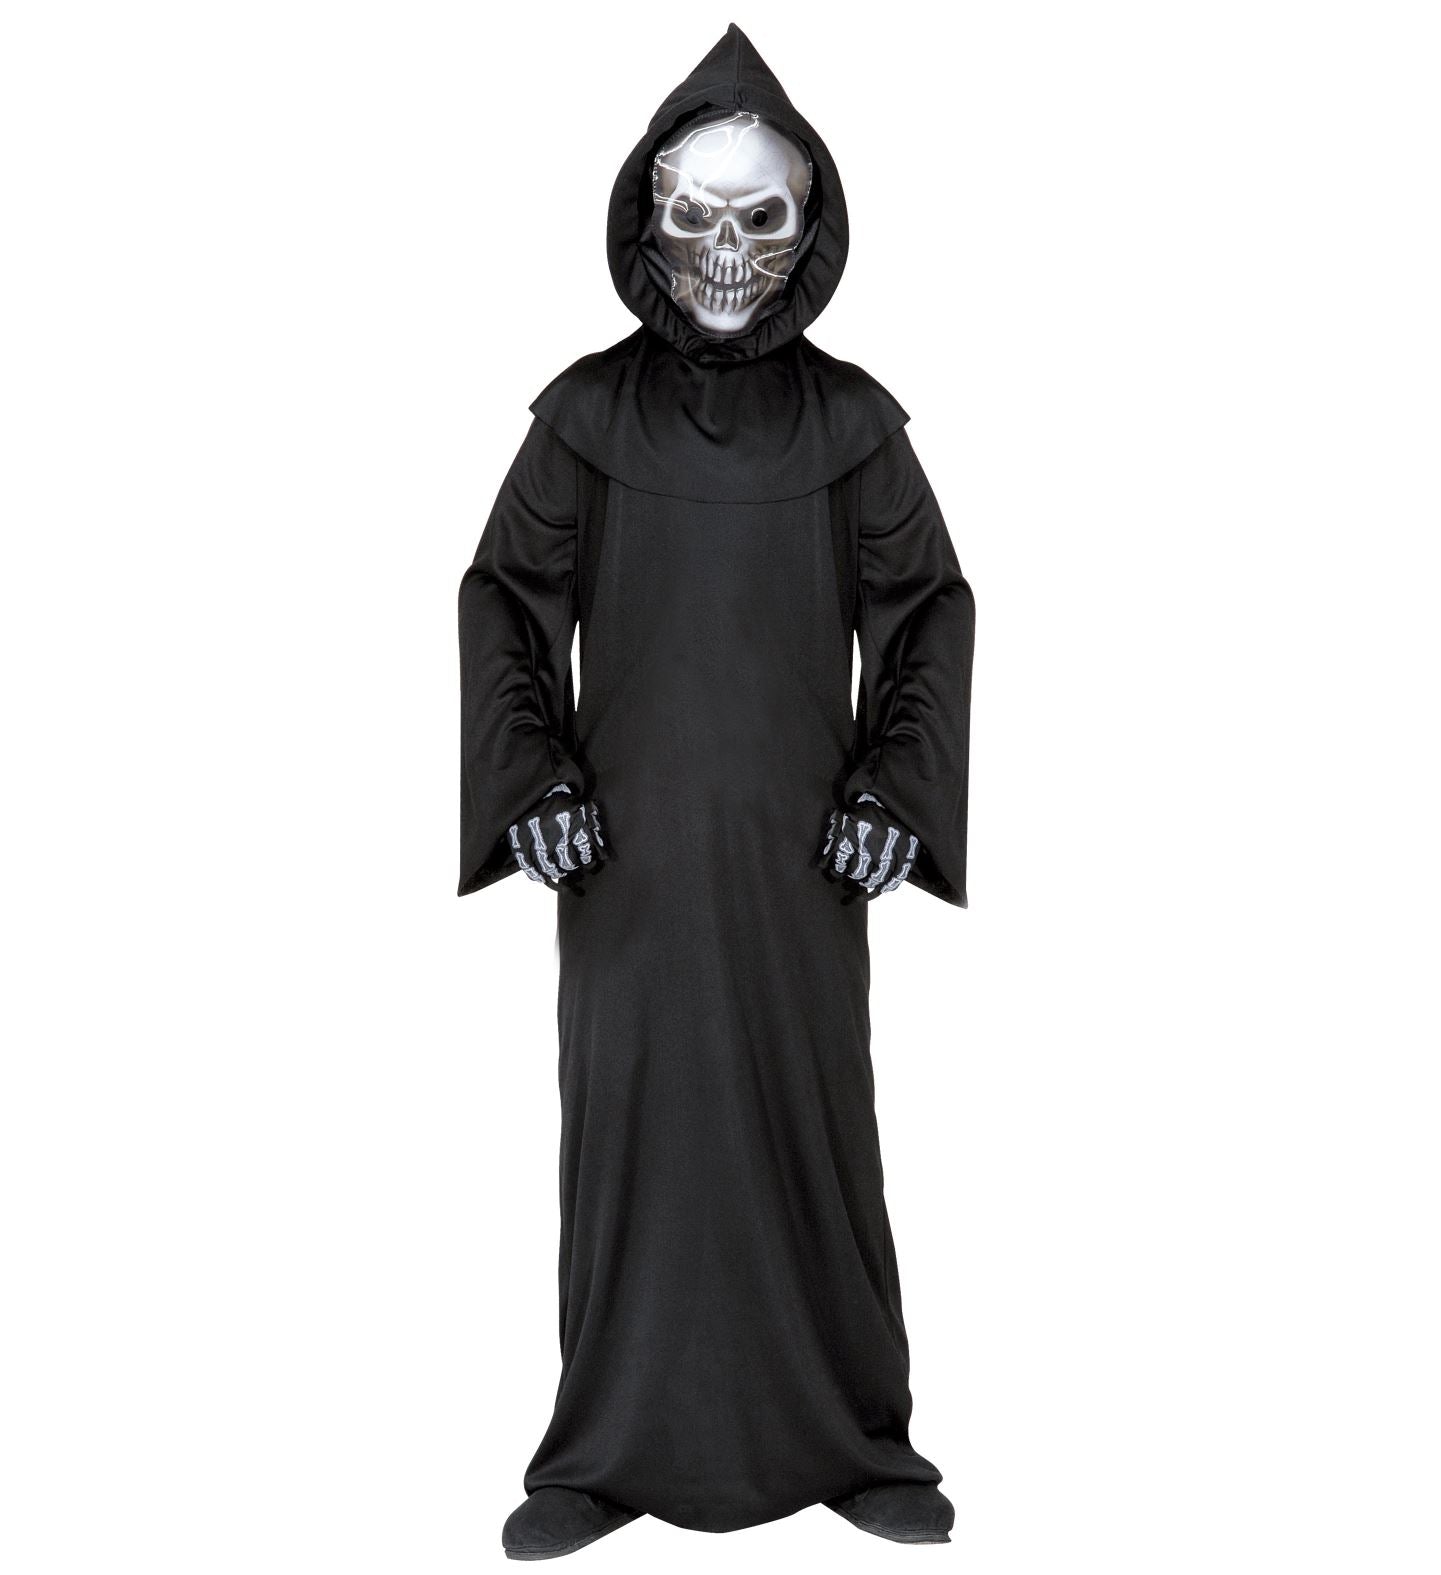 Grim Reaper Costume with Holographic Mask Kids